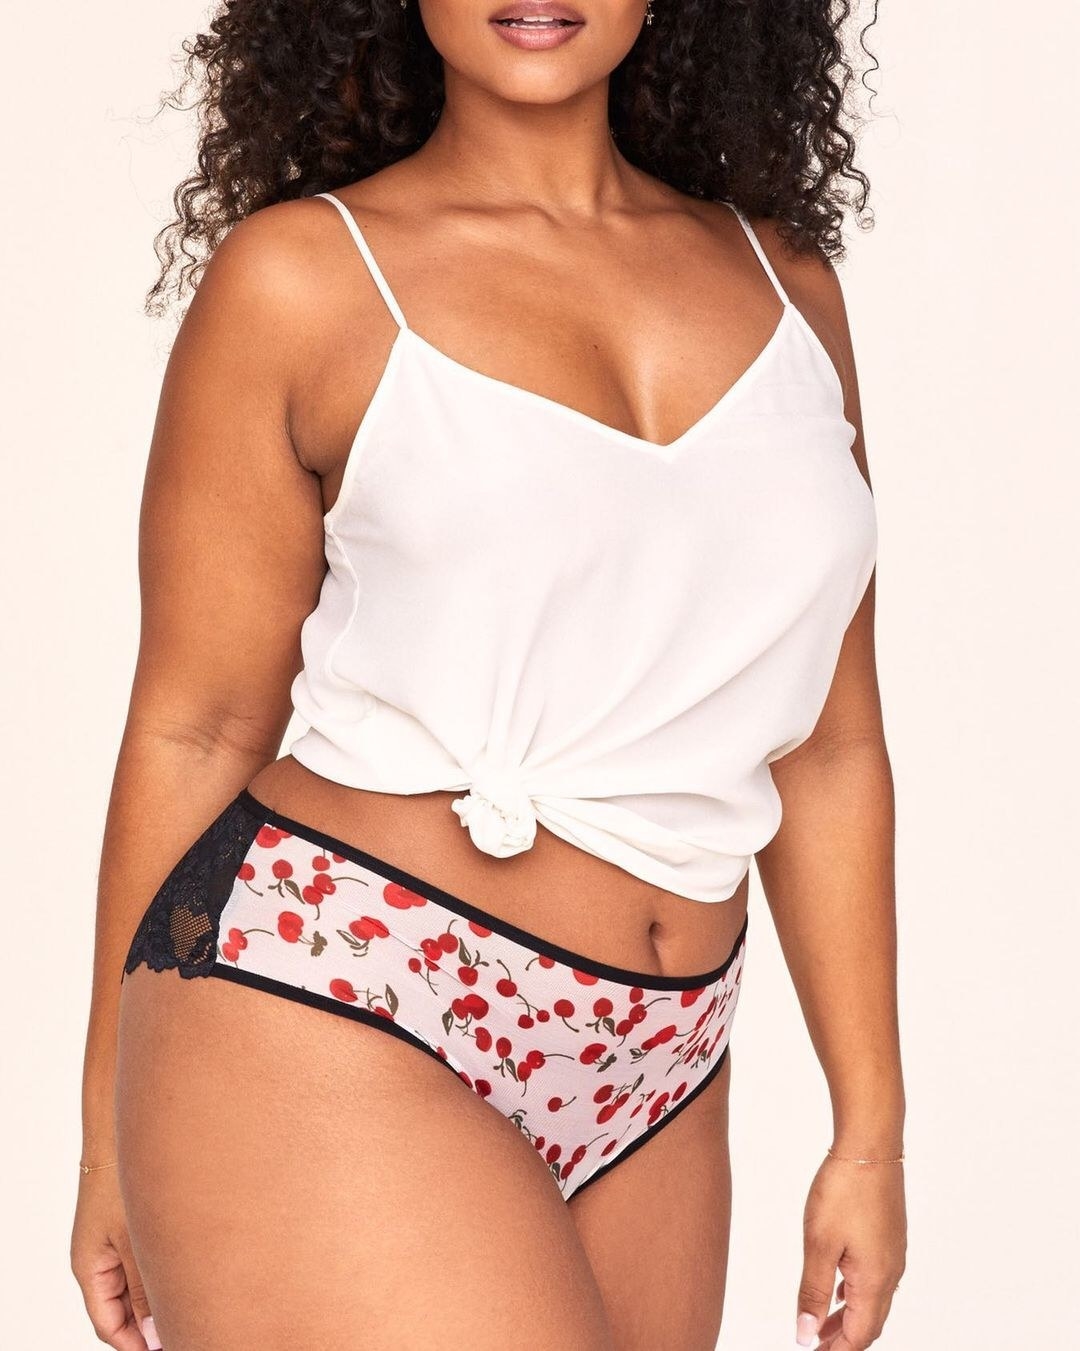 a model wearing pink underwear with a cherry print and black lace detail